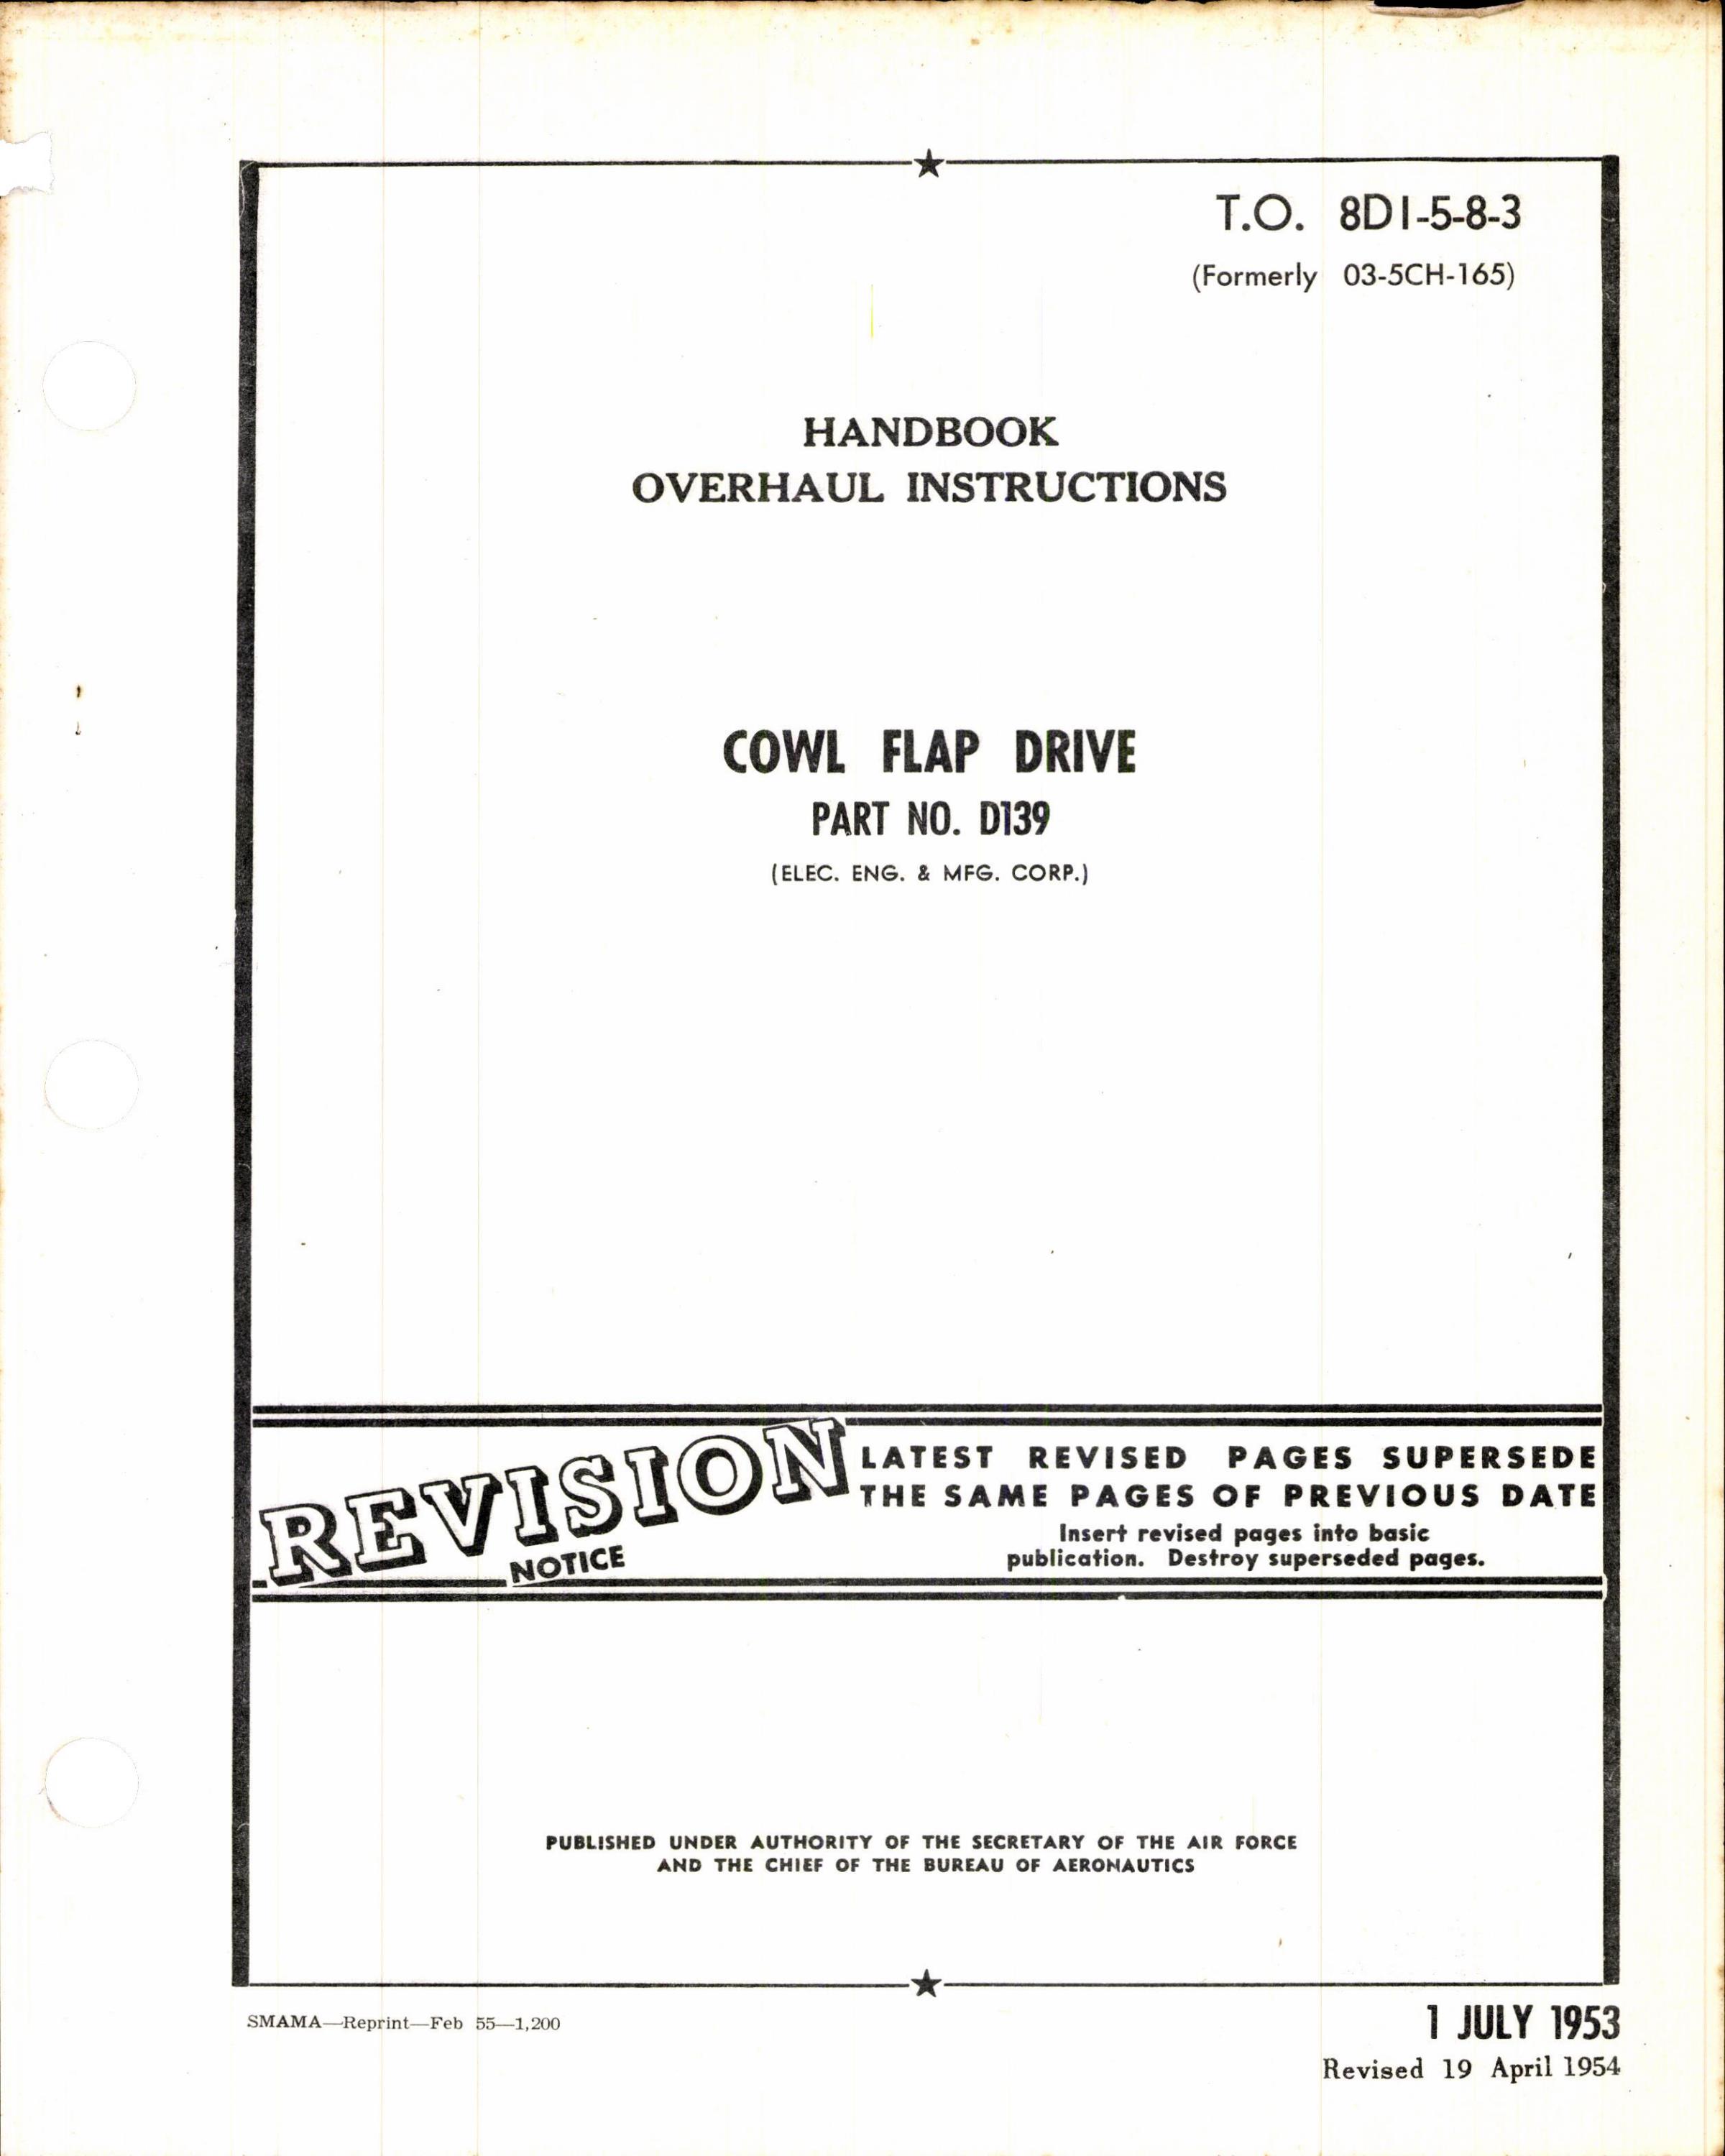 Sample page 1 from AirCorps Library document: Overhaul Instructions for Cowl Flap Drive Part No D139